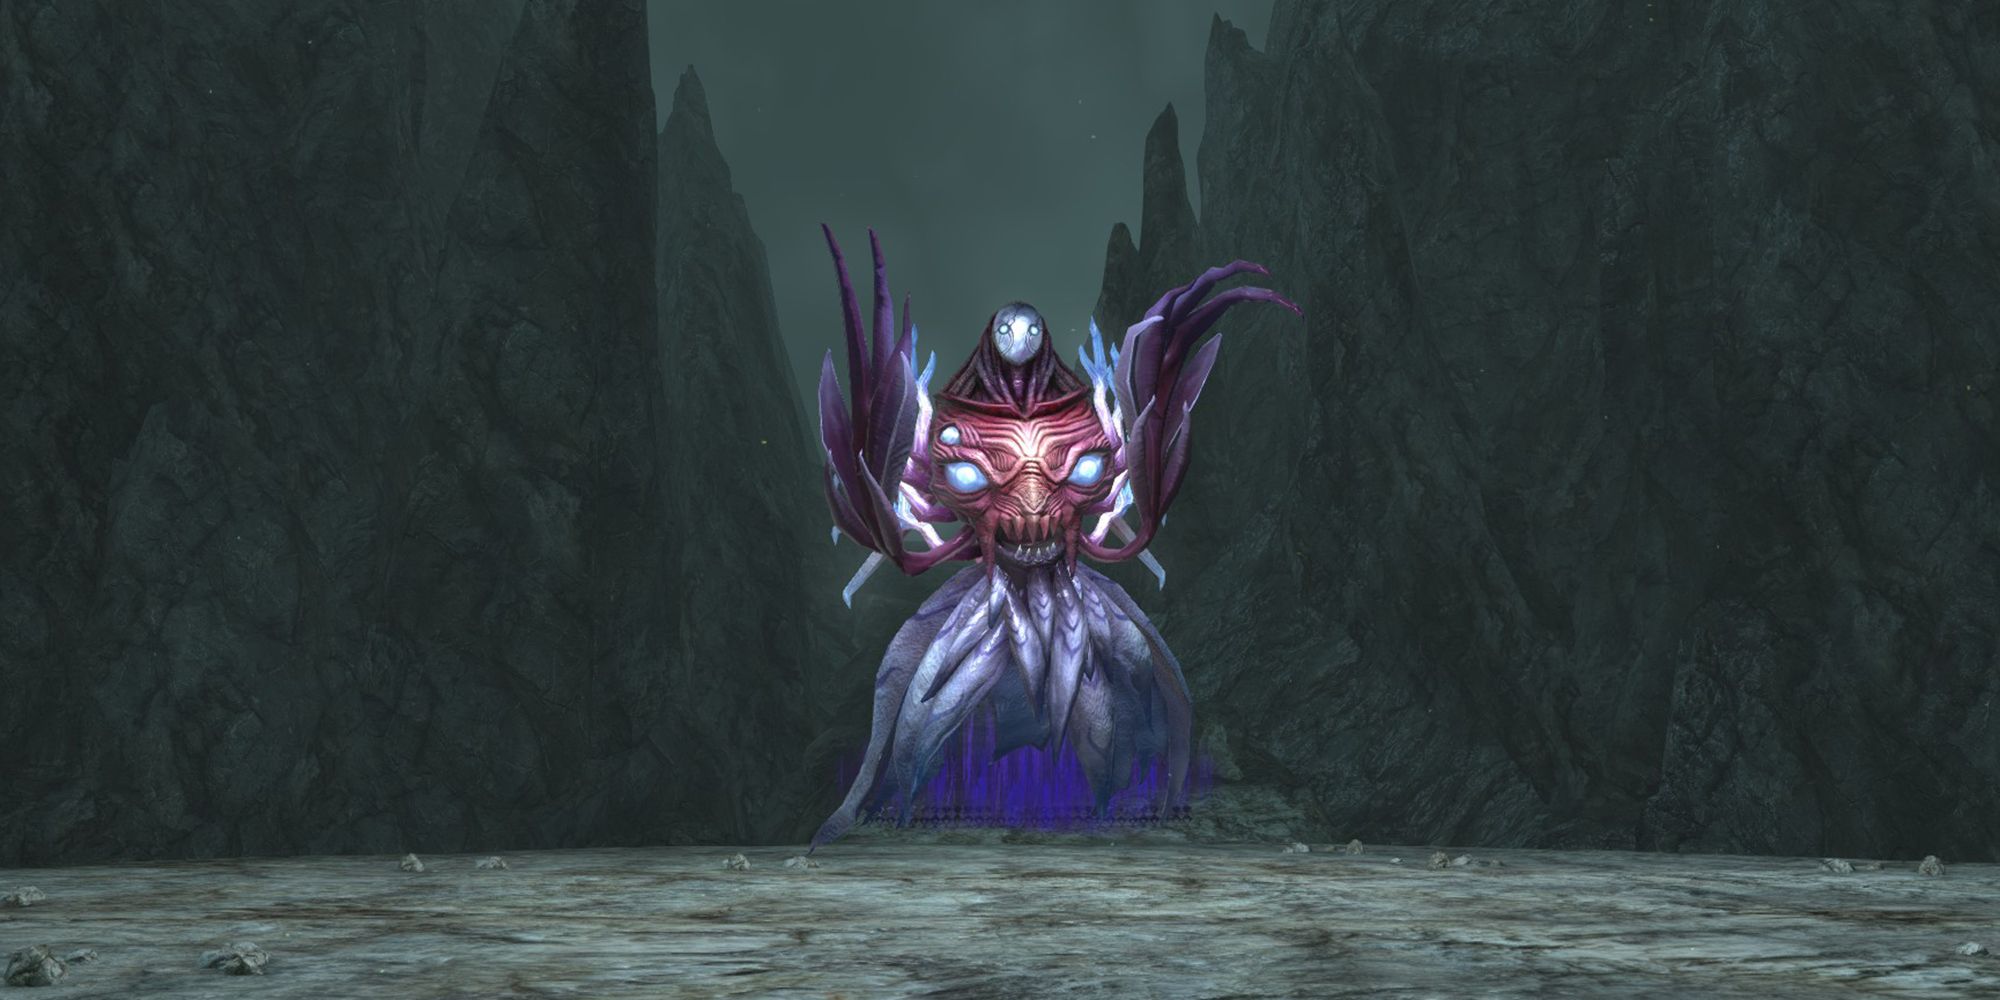 lugat, the first boss of sirensong sea